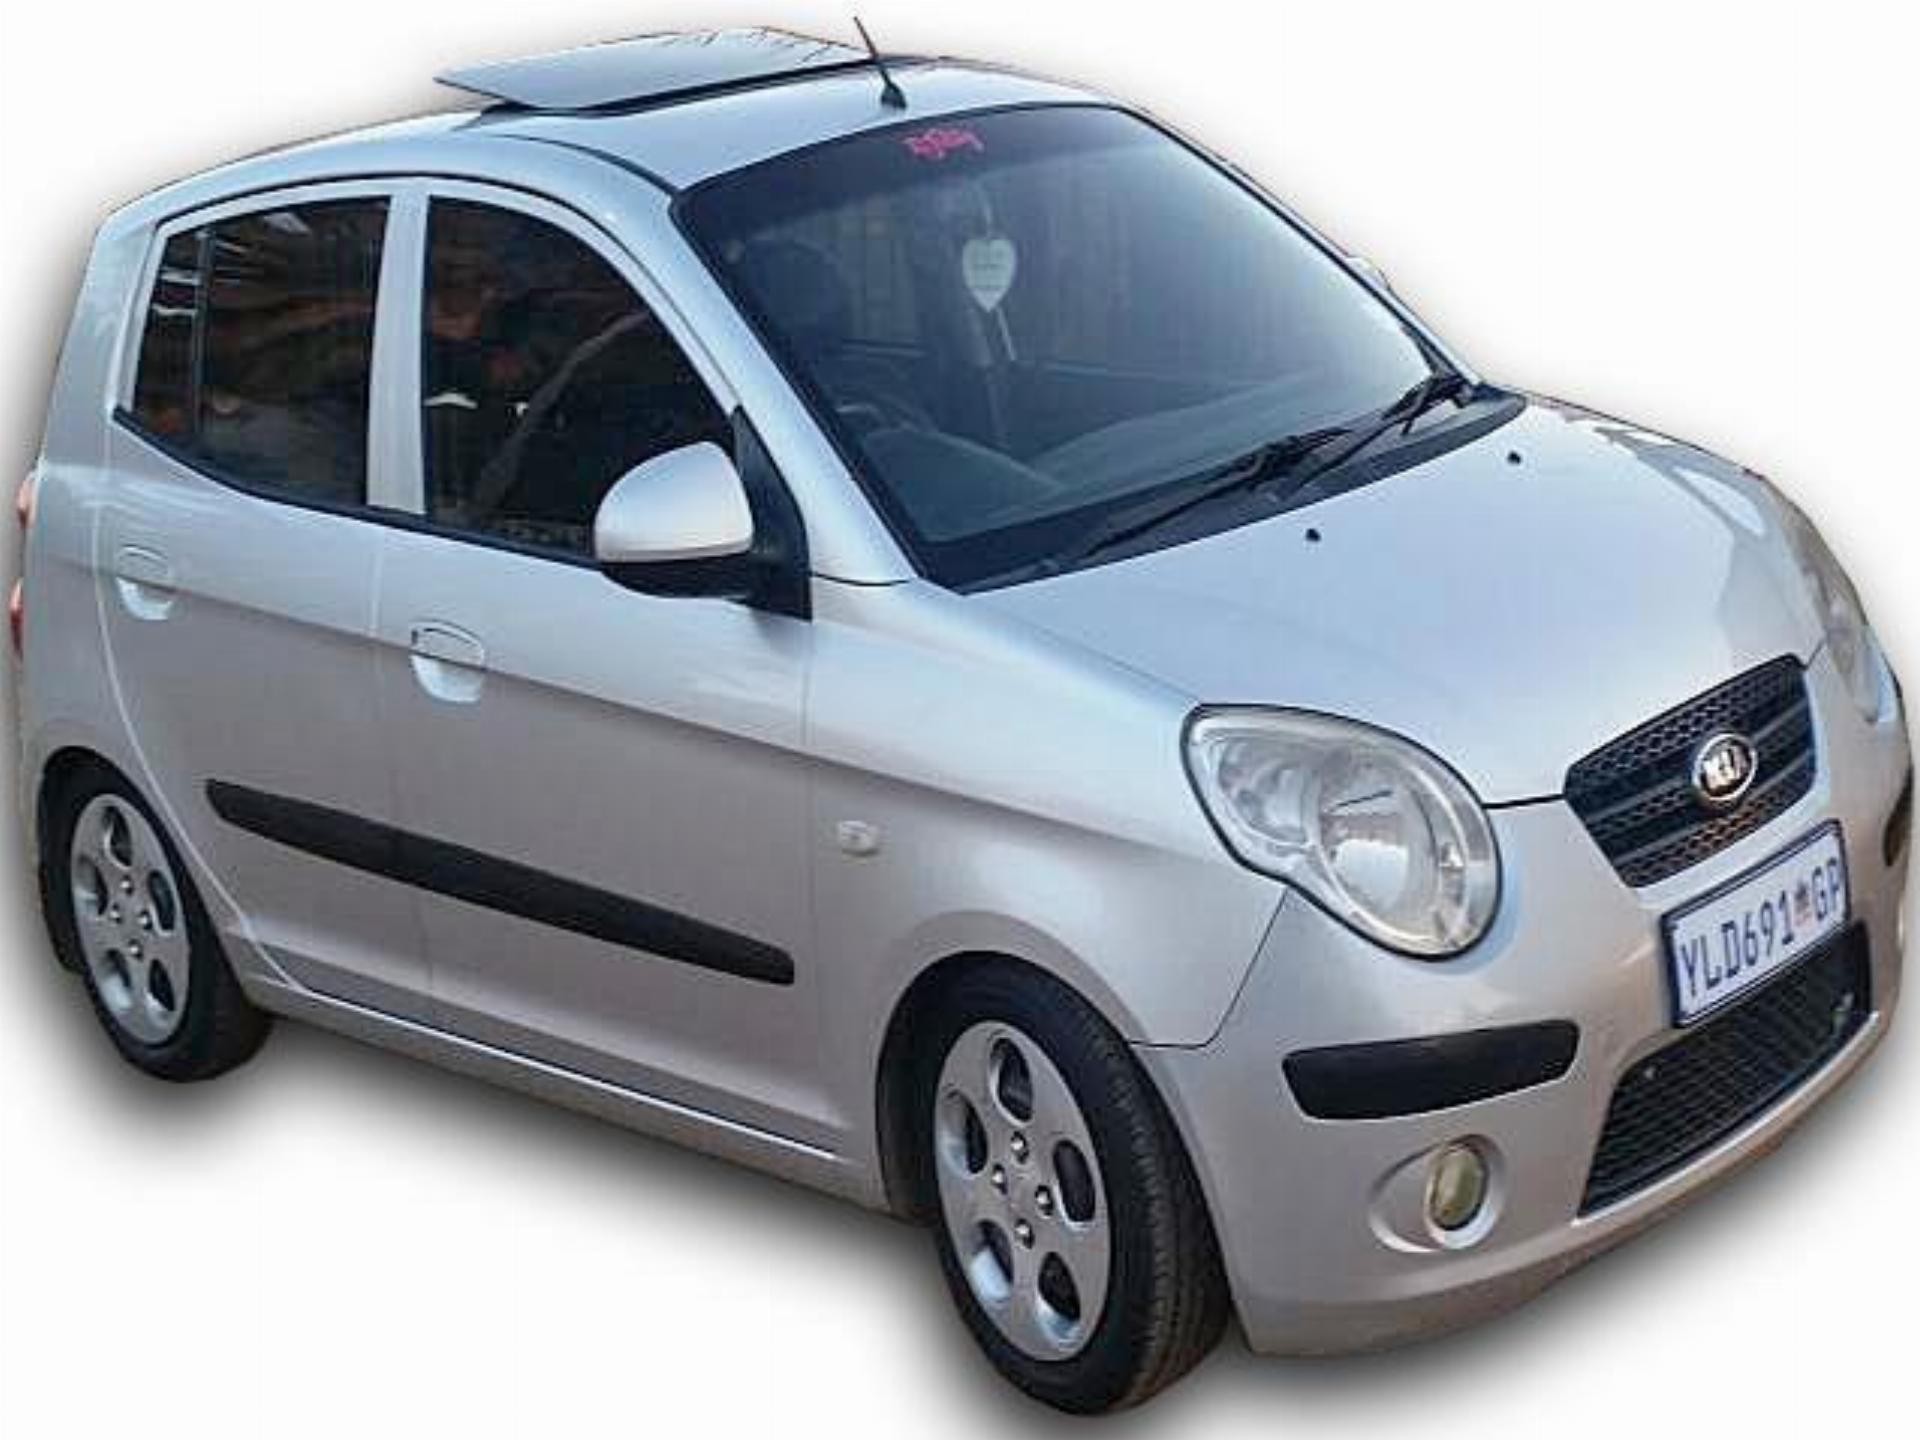 Used Kia Picanto 2009 on auction PV1023395